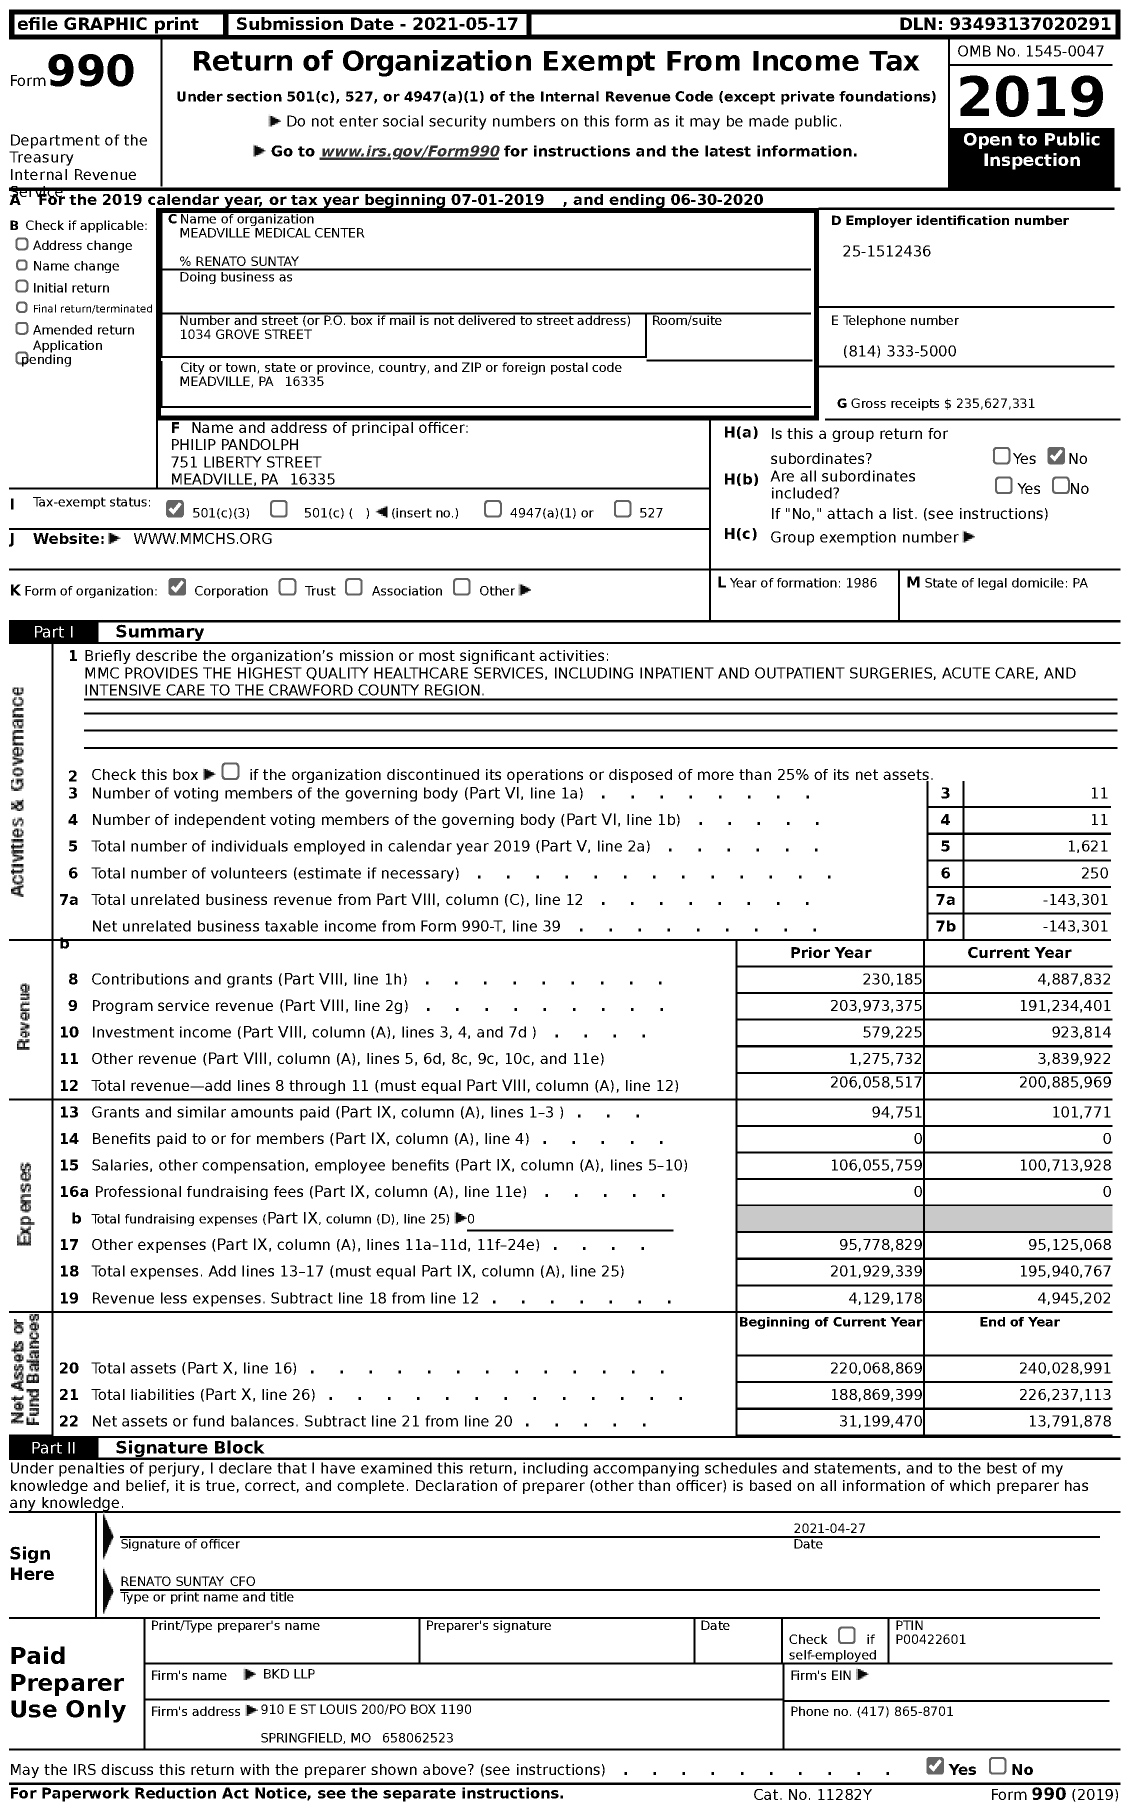 Image of first page of 2019 Form 990 for Meadville Medical Center (MMC)